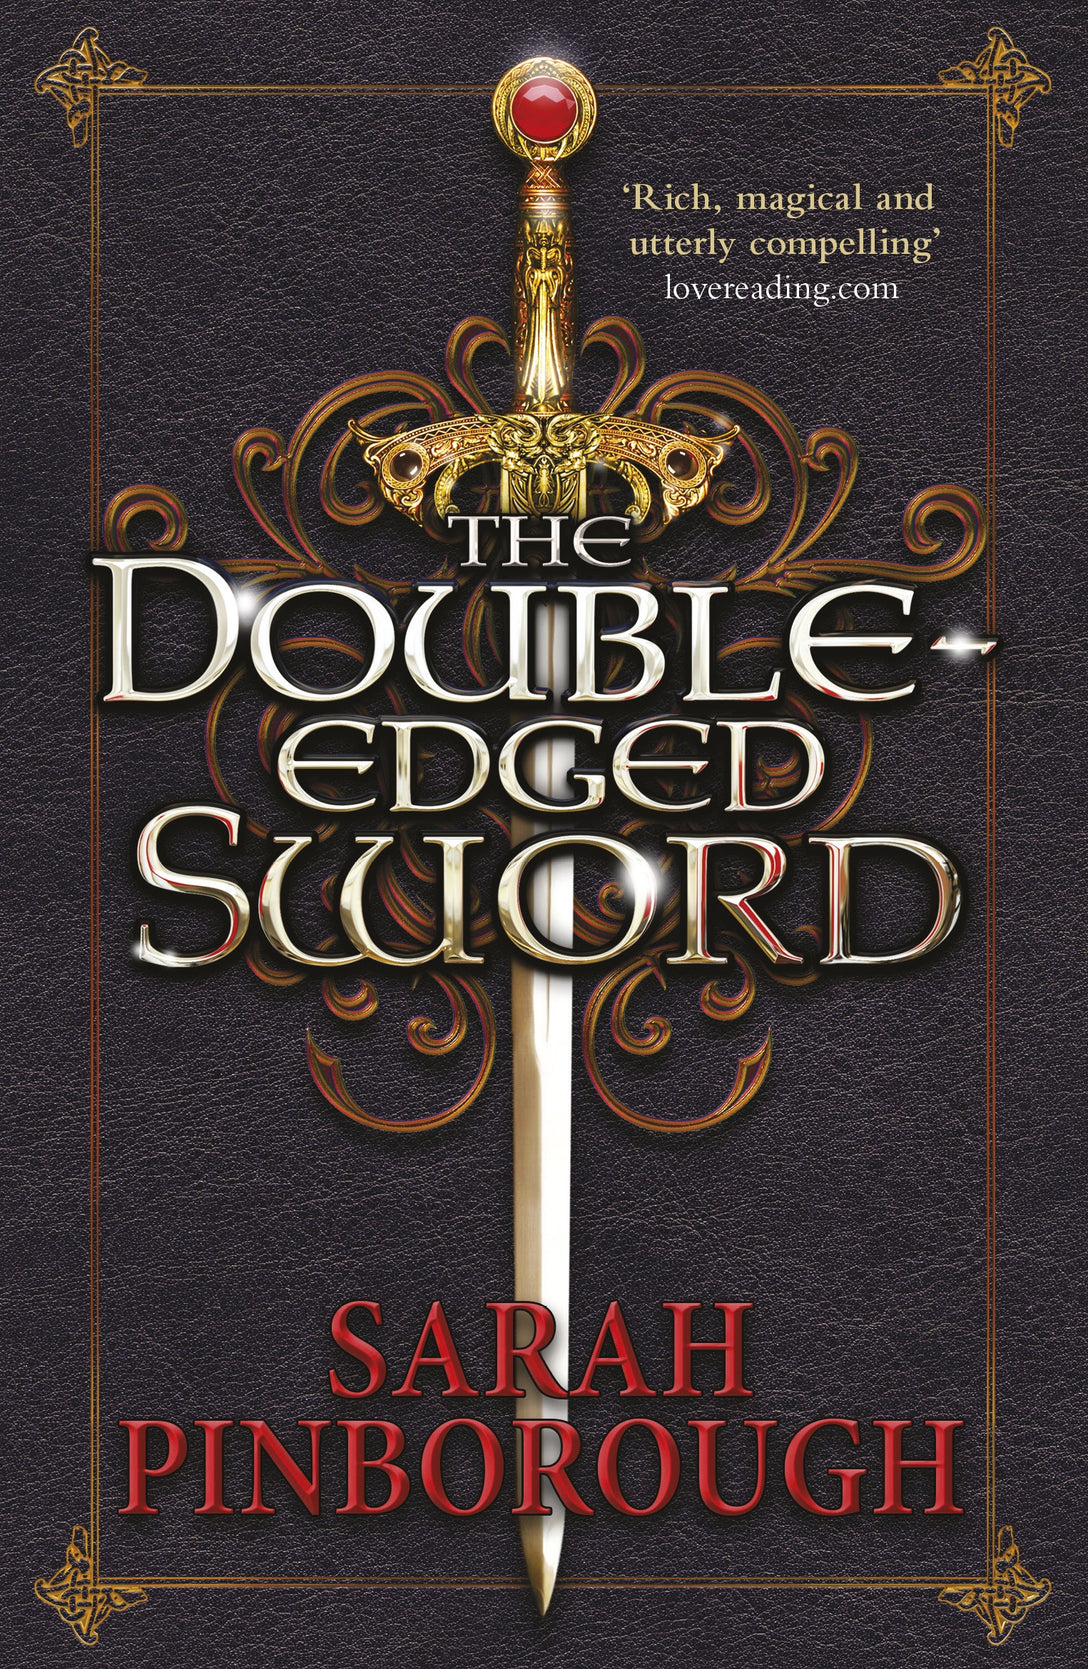 The Double-Edged Sword by Sarah Pinborough